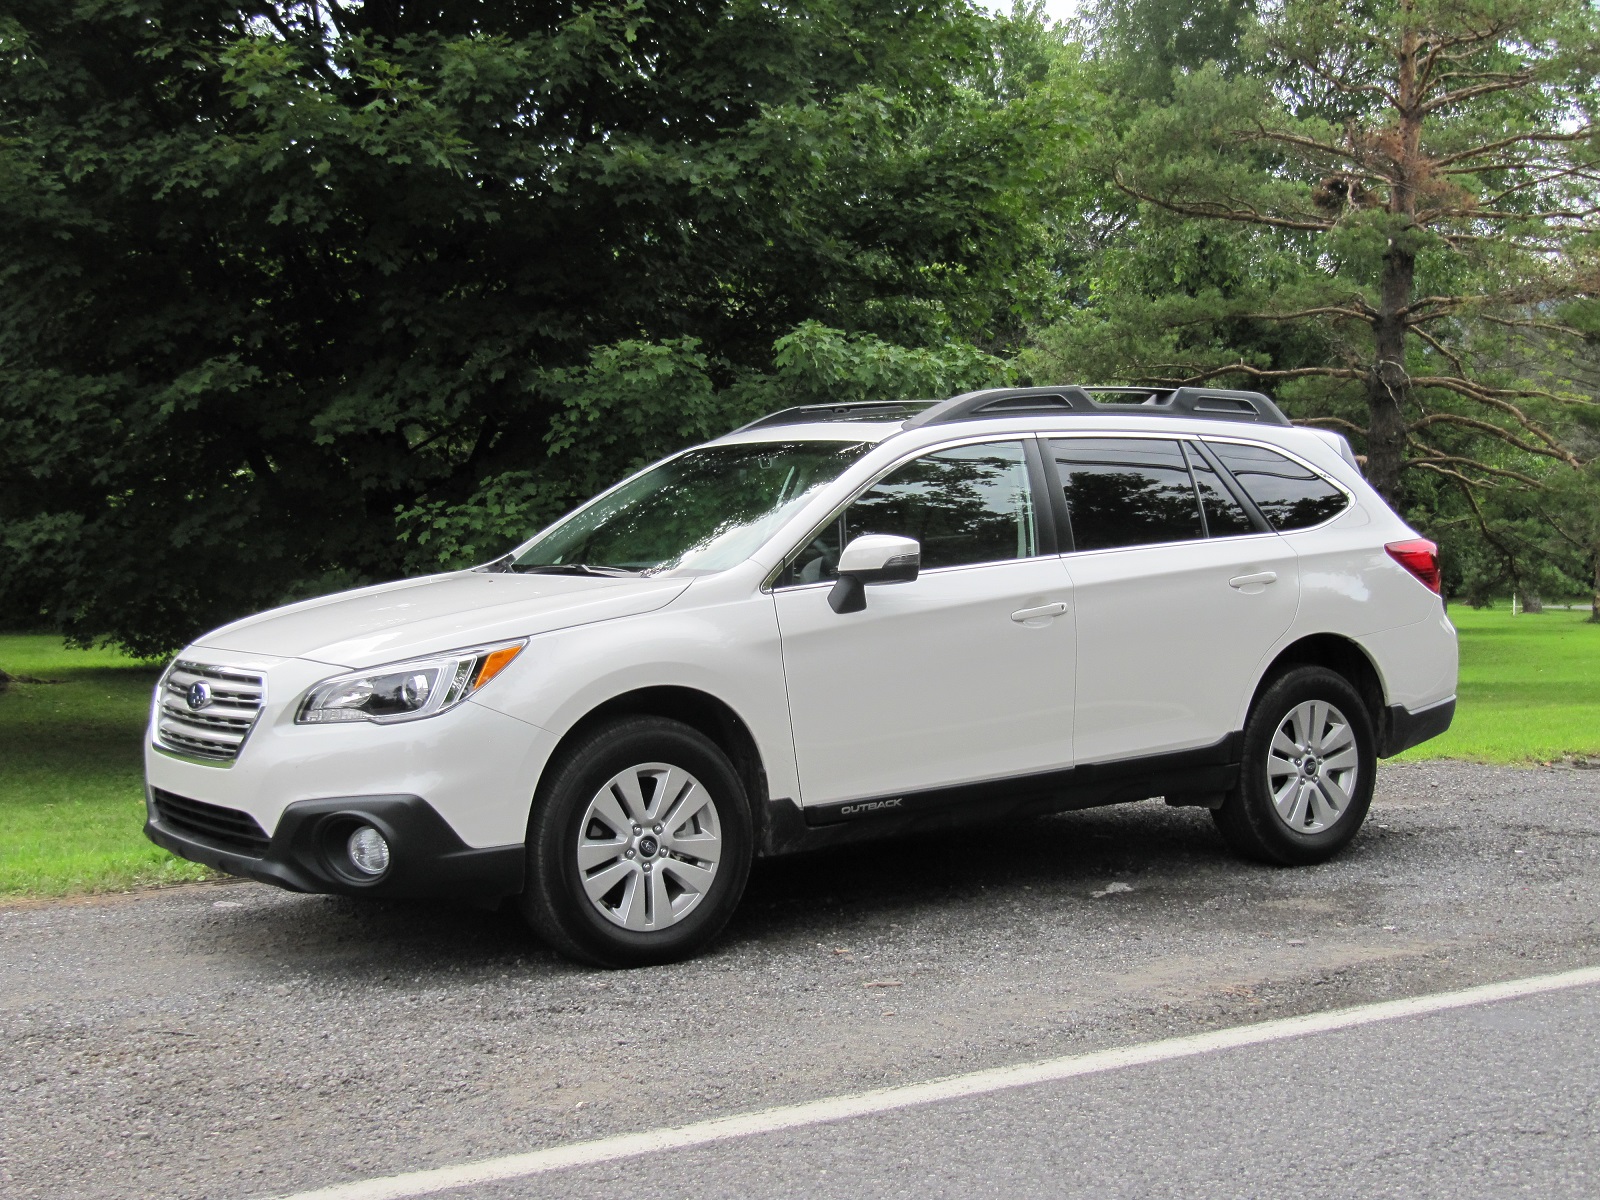 2015 Subaru Outback: Gas Mileage Review Of Crossover Wagon Utility Vehicle